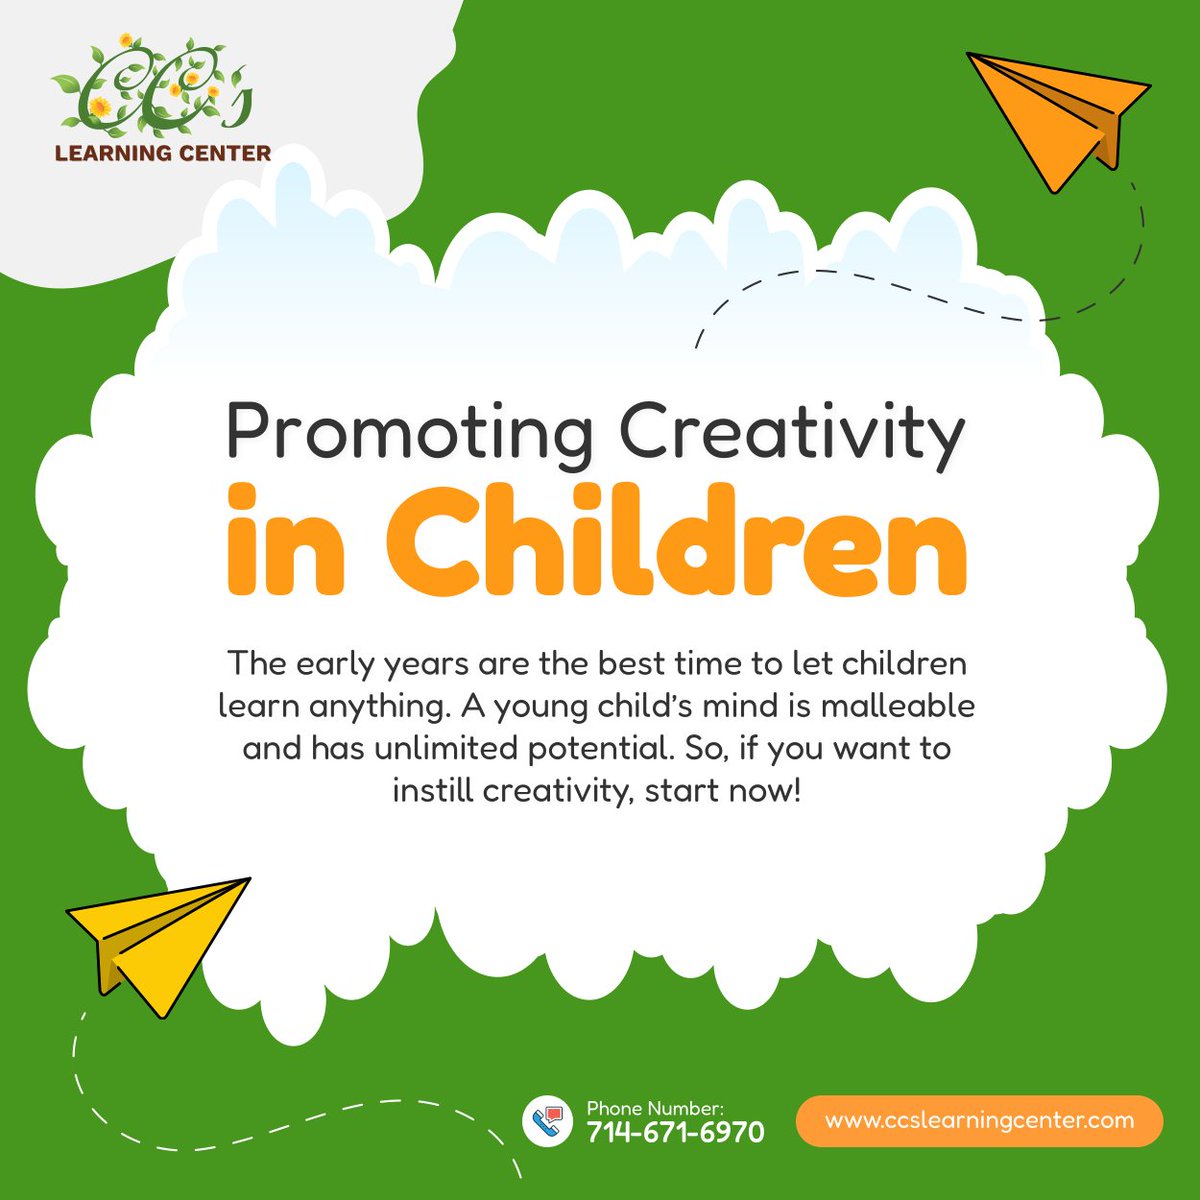 Creativity is not inborn. Anyone can be creative and this skill can be learned in the early years of a child’s development. You can help promote creativity in your child. Read more at: bit.ly/3PF6zbp.

#ChildCreativity #BreaCA #Childcare